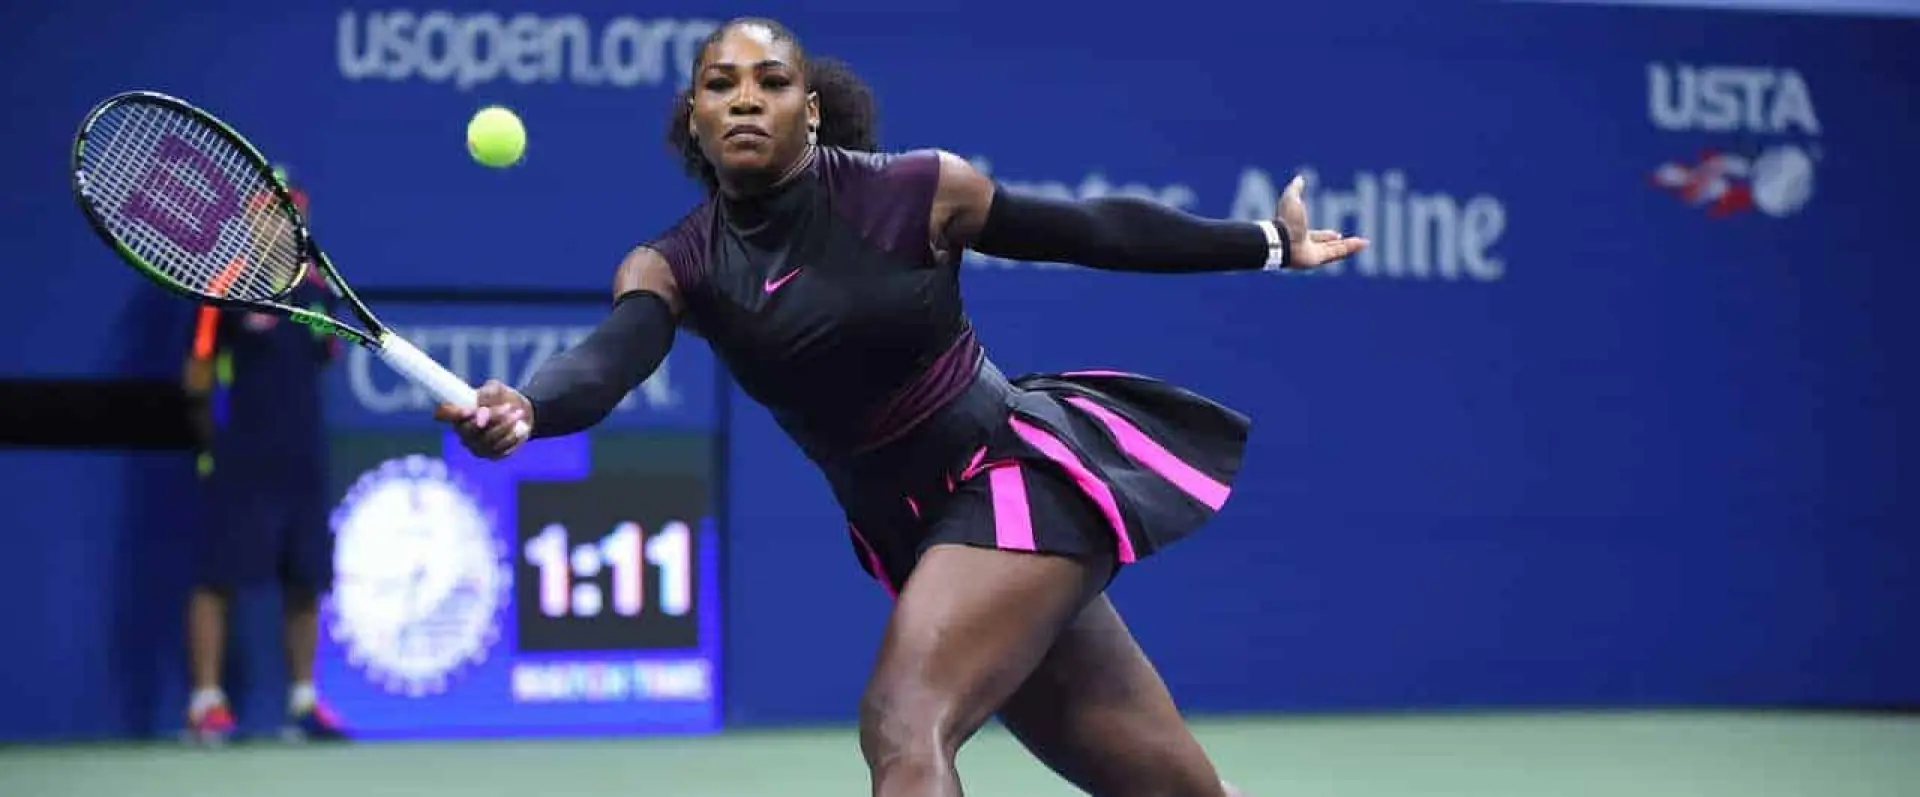 Serena Williams tips feature heavily among the 2017 Grand Slam betting in women's tennis.